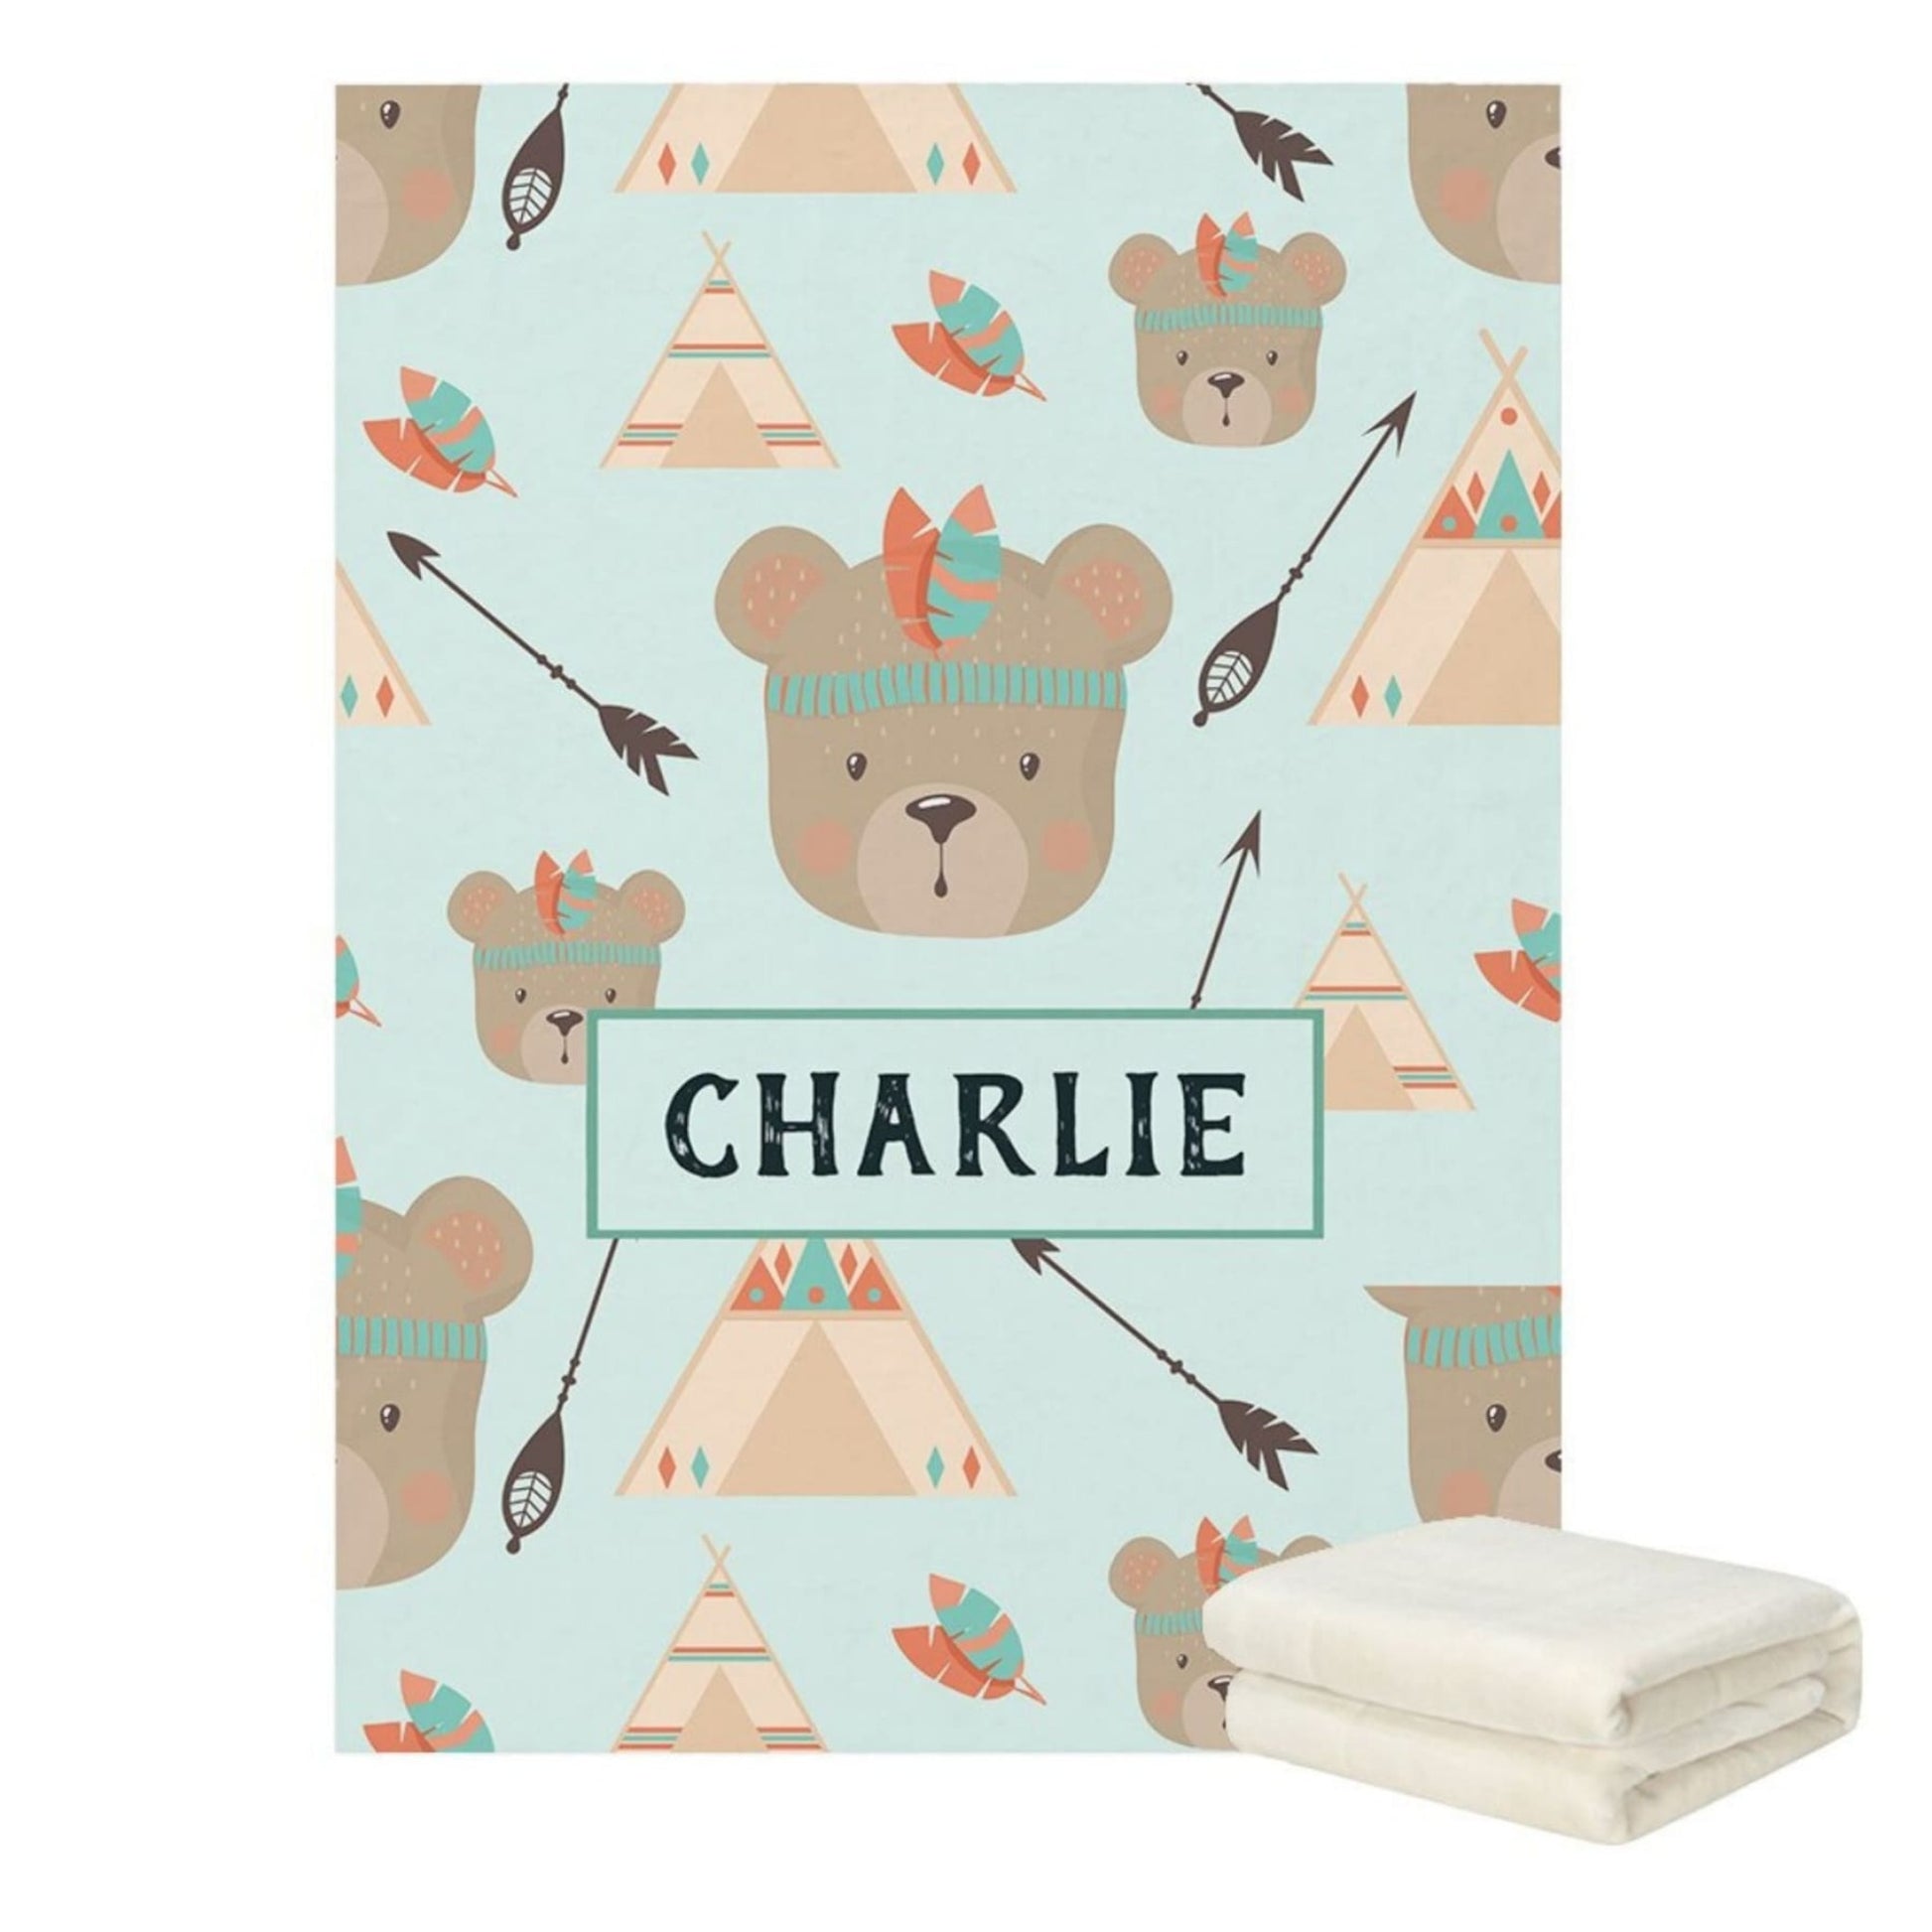 Bubba Personalized Baby Fleece Blankets bear themed with the baby's name Charlie on it